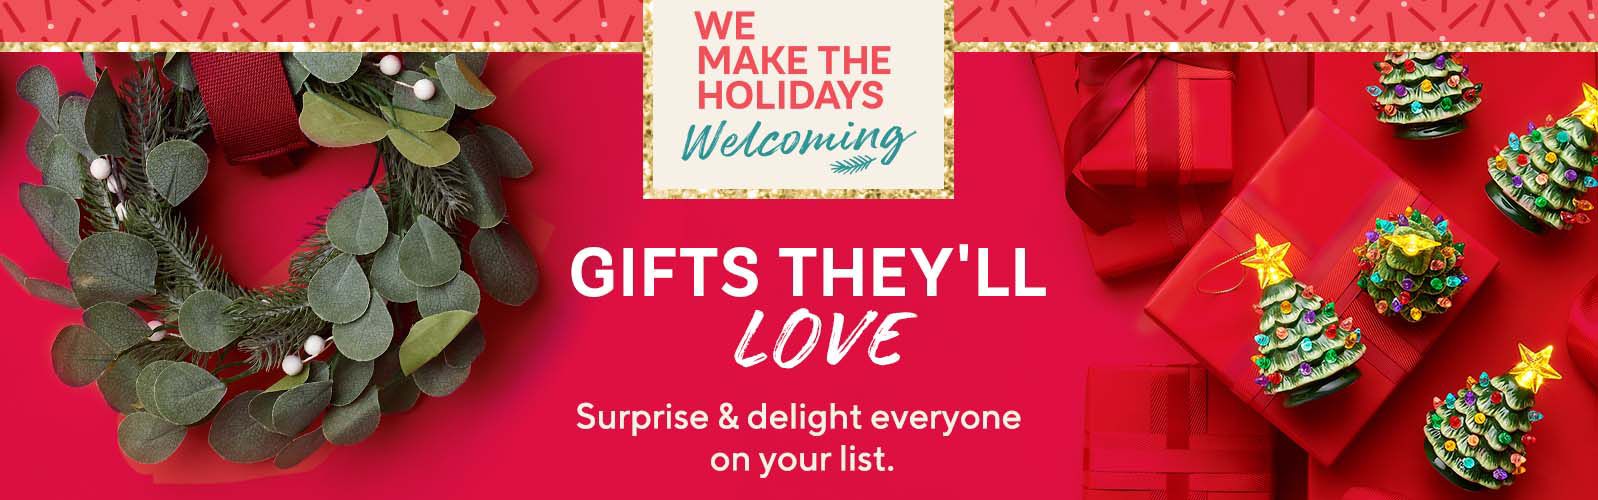 We Make the Holidays Welcoming.  Gifts They'll Love.  Surprise & delight everyone on your list.